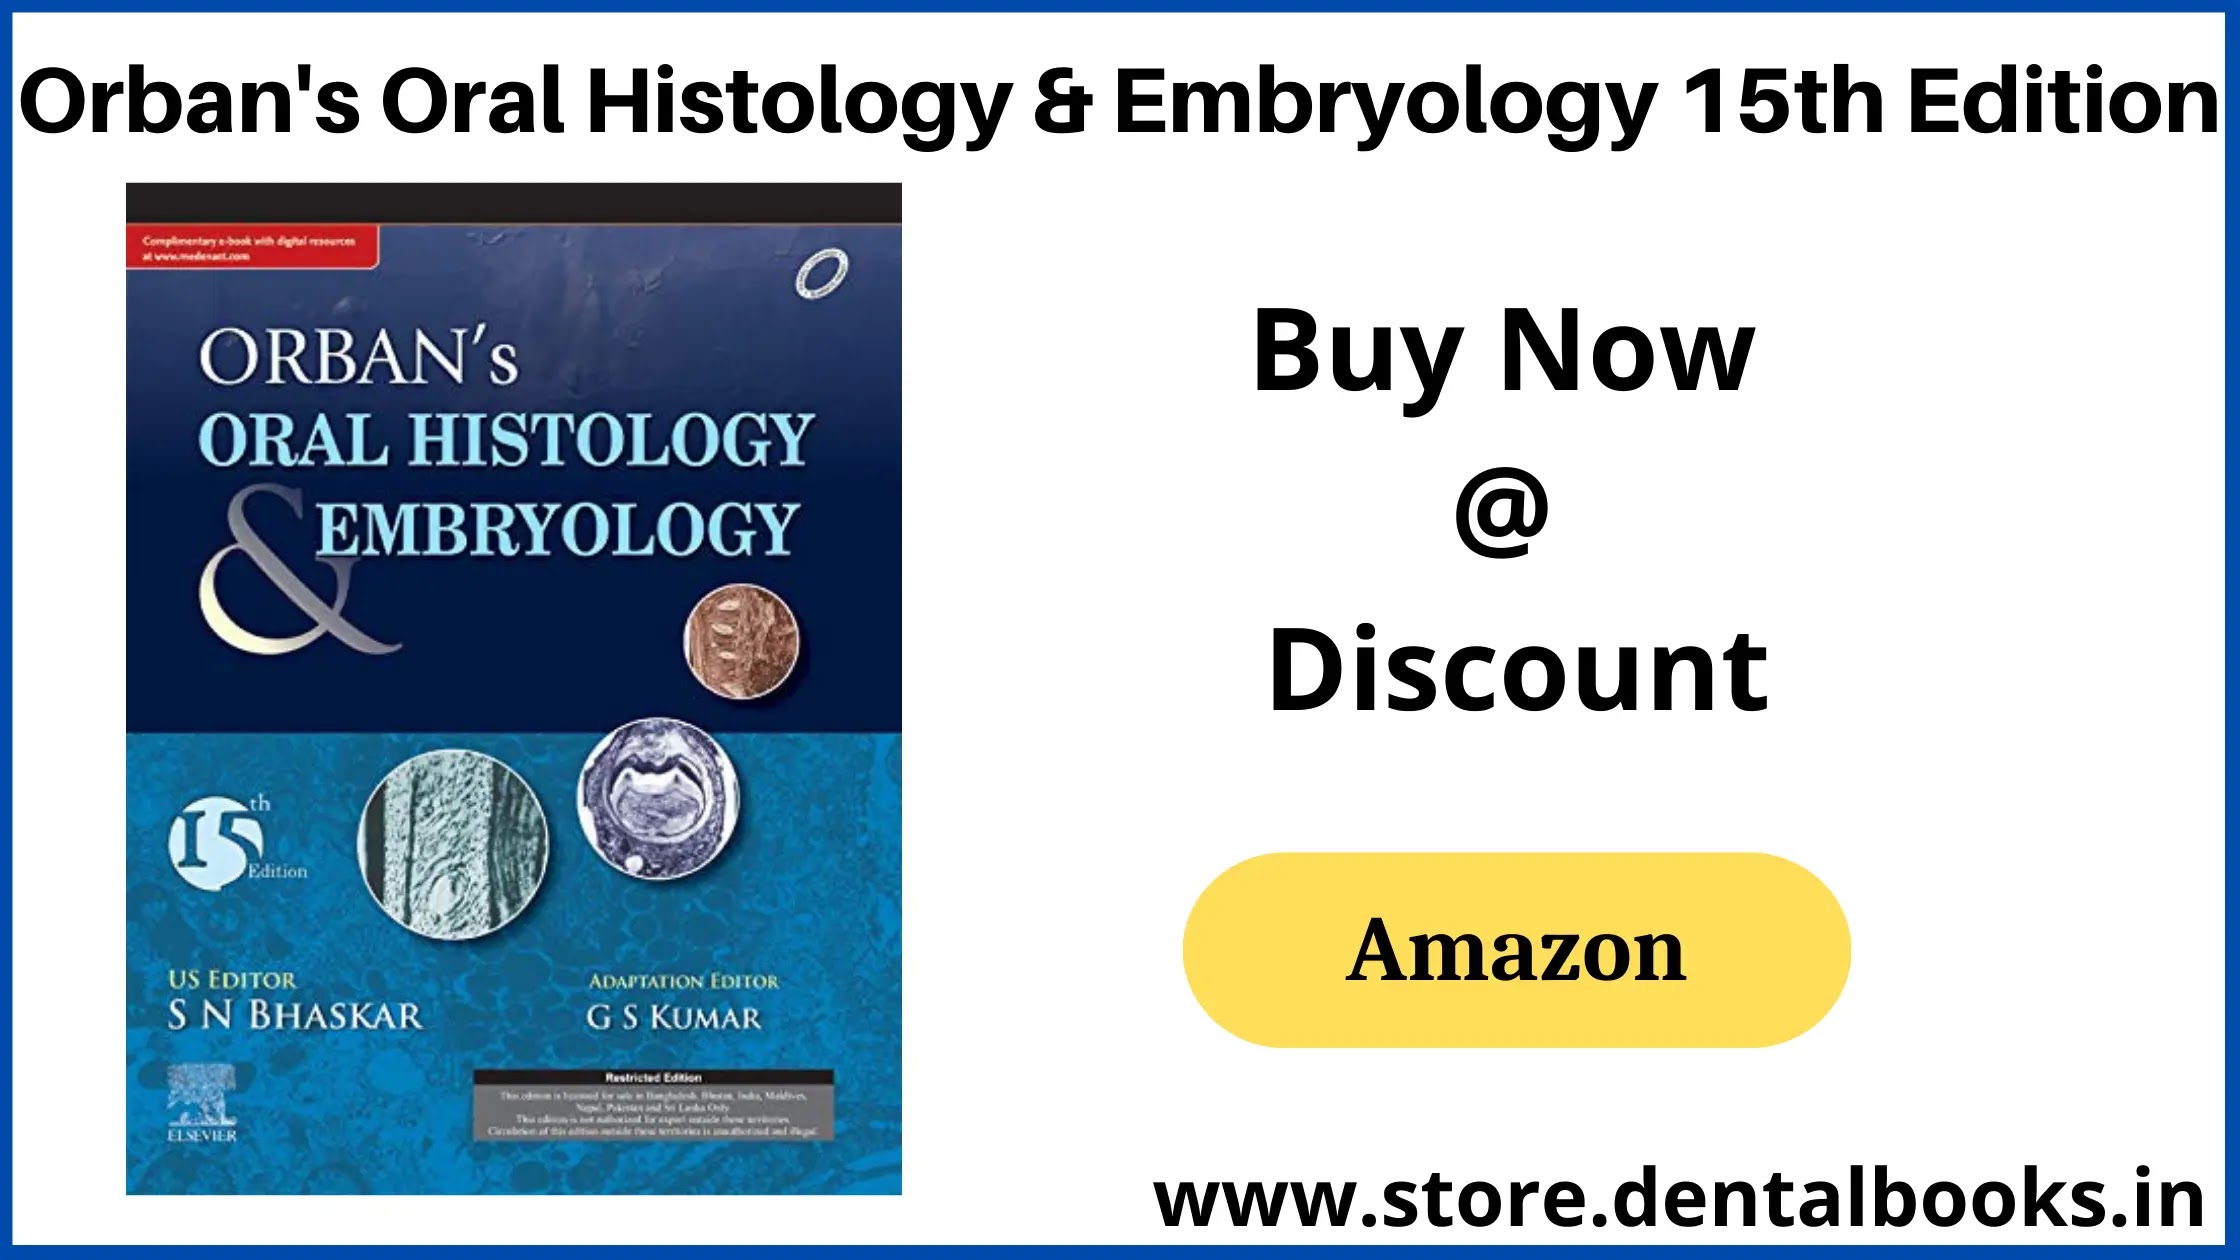 Orban's Oral Histology & Embryology 15th Edition | Dental Store